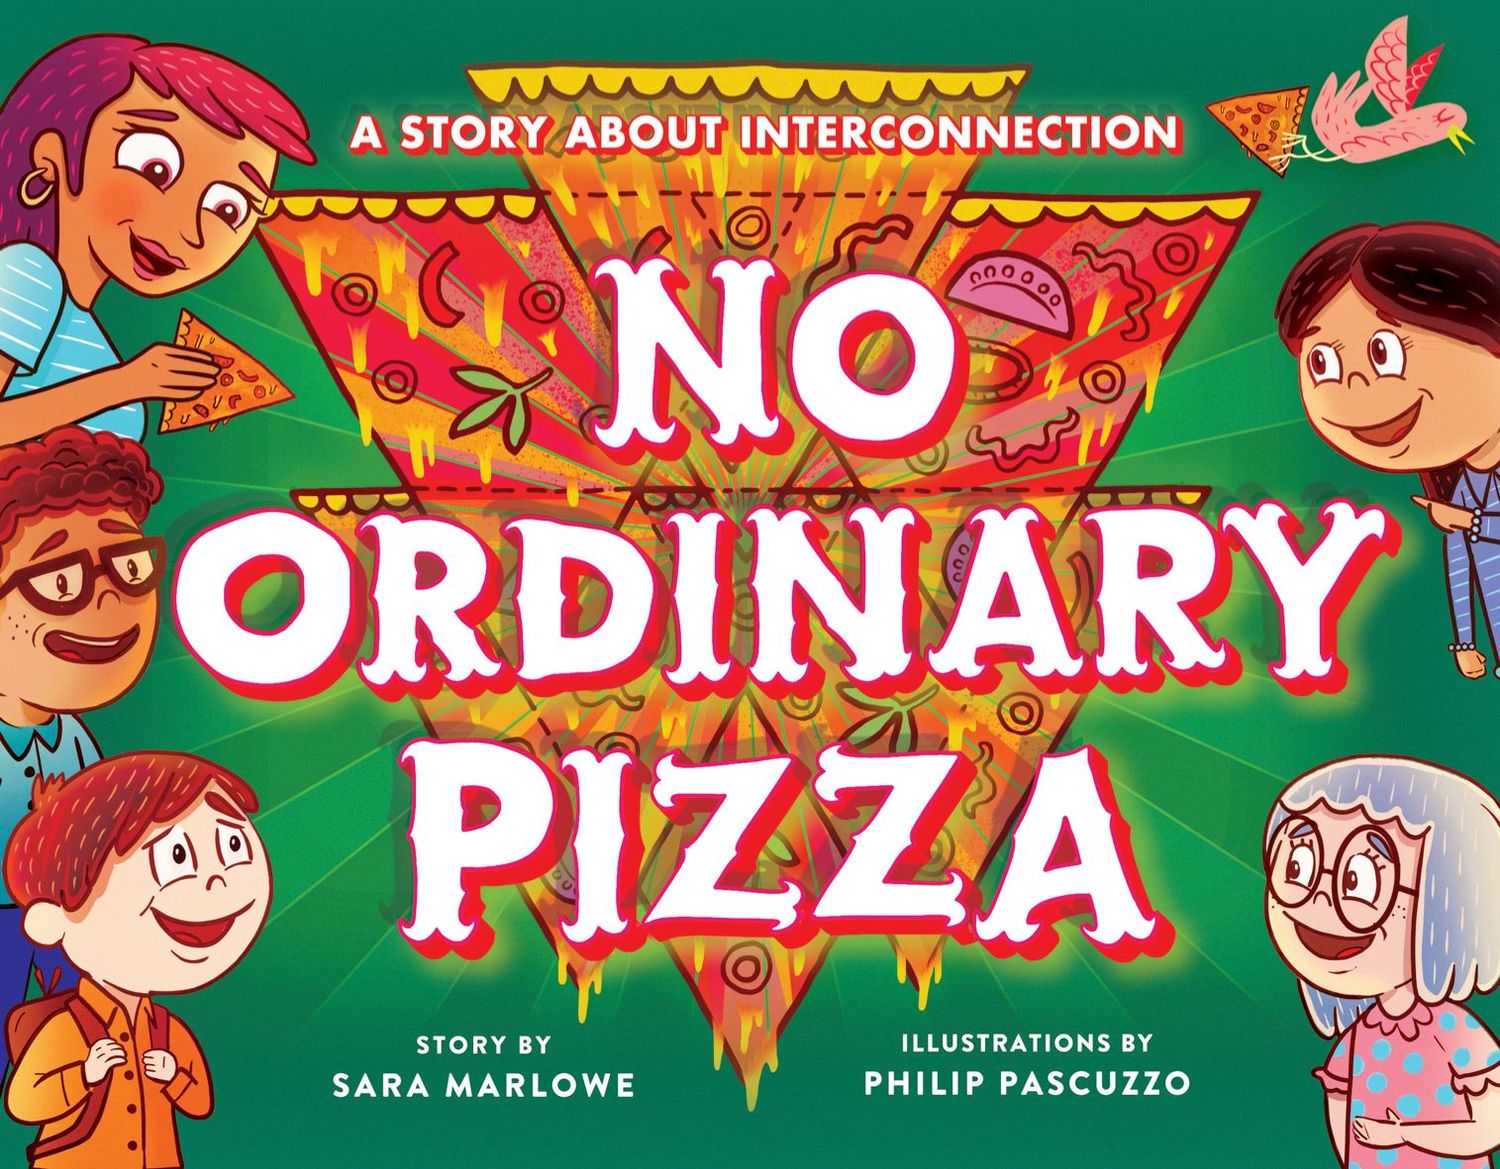 Gallery Photo of Sara's newest mindfulness book, No Ordinary Pizza: A Story about Interconnection. Available widely.